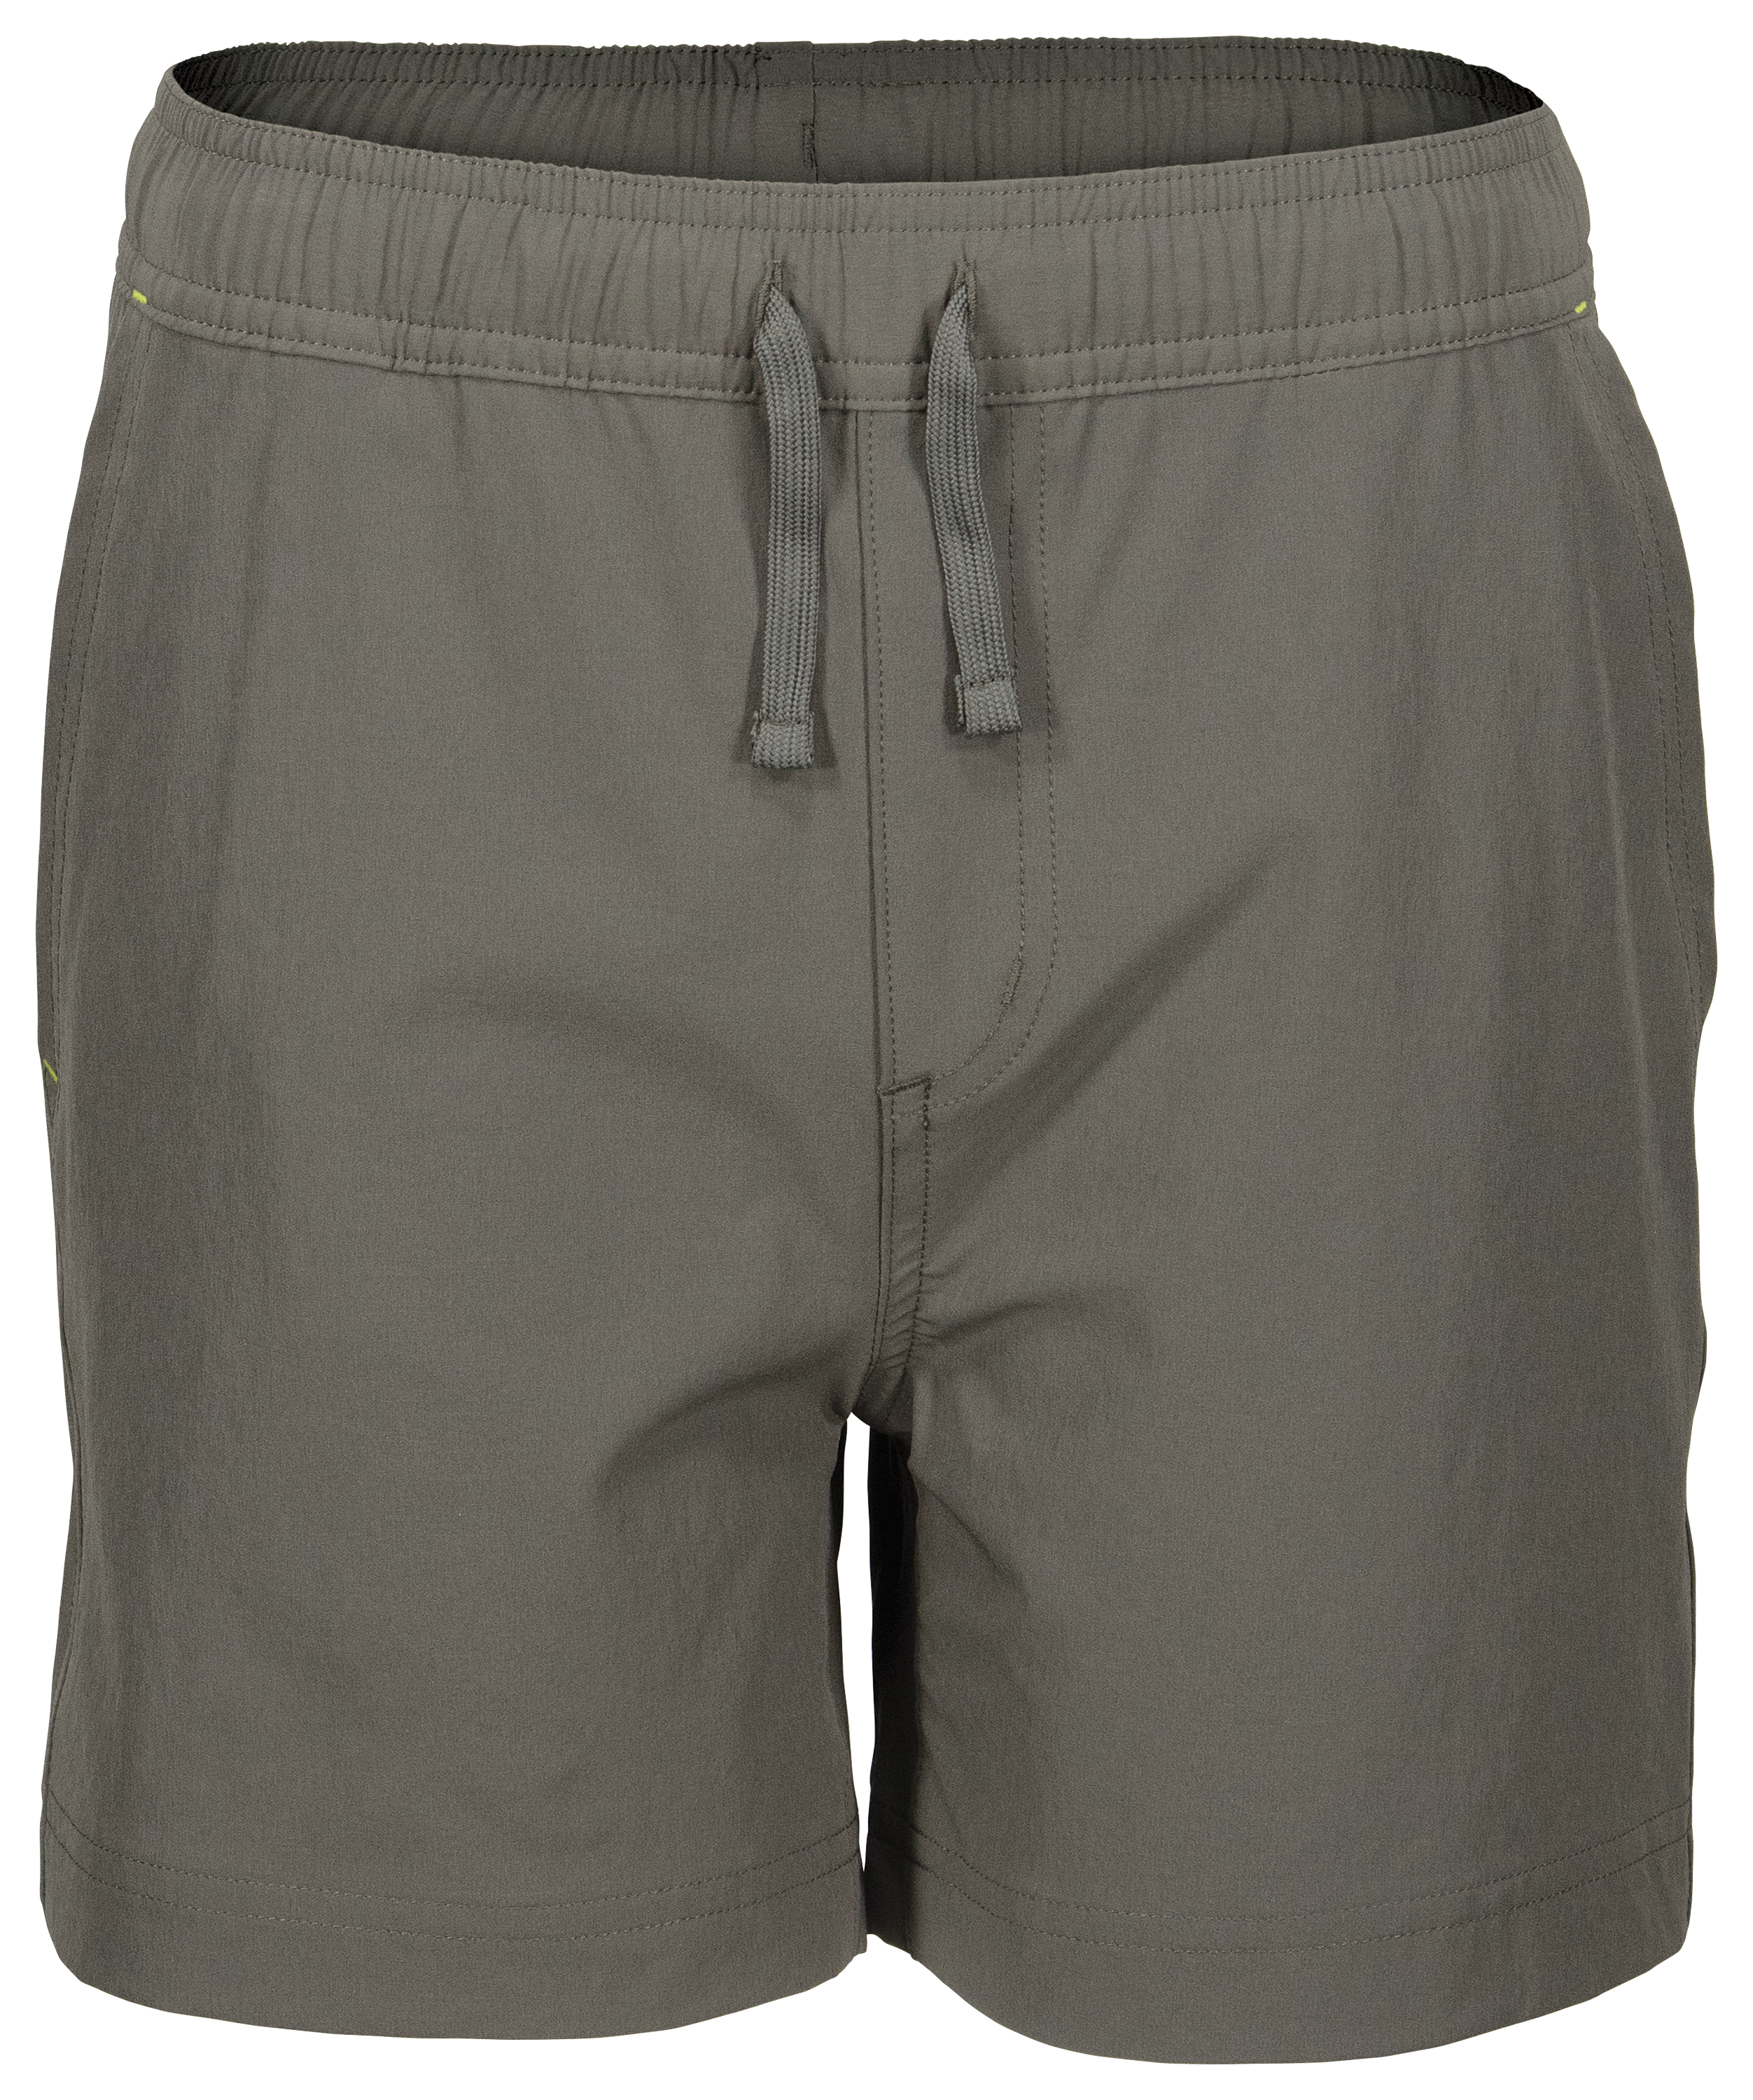 World Wide Sportsman Charter Pull-On Shorts for Boys - Gray - XL